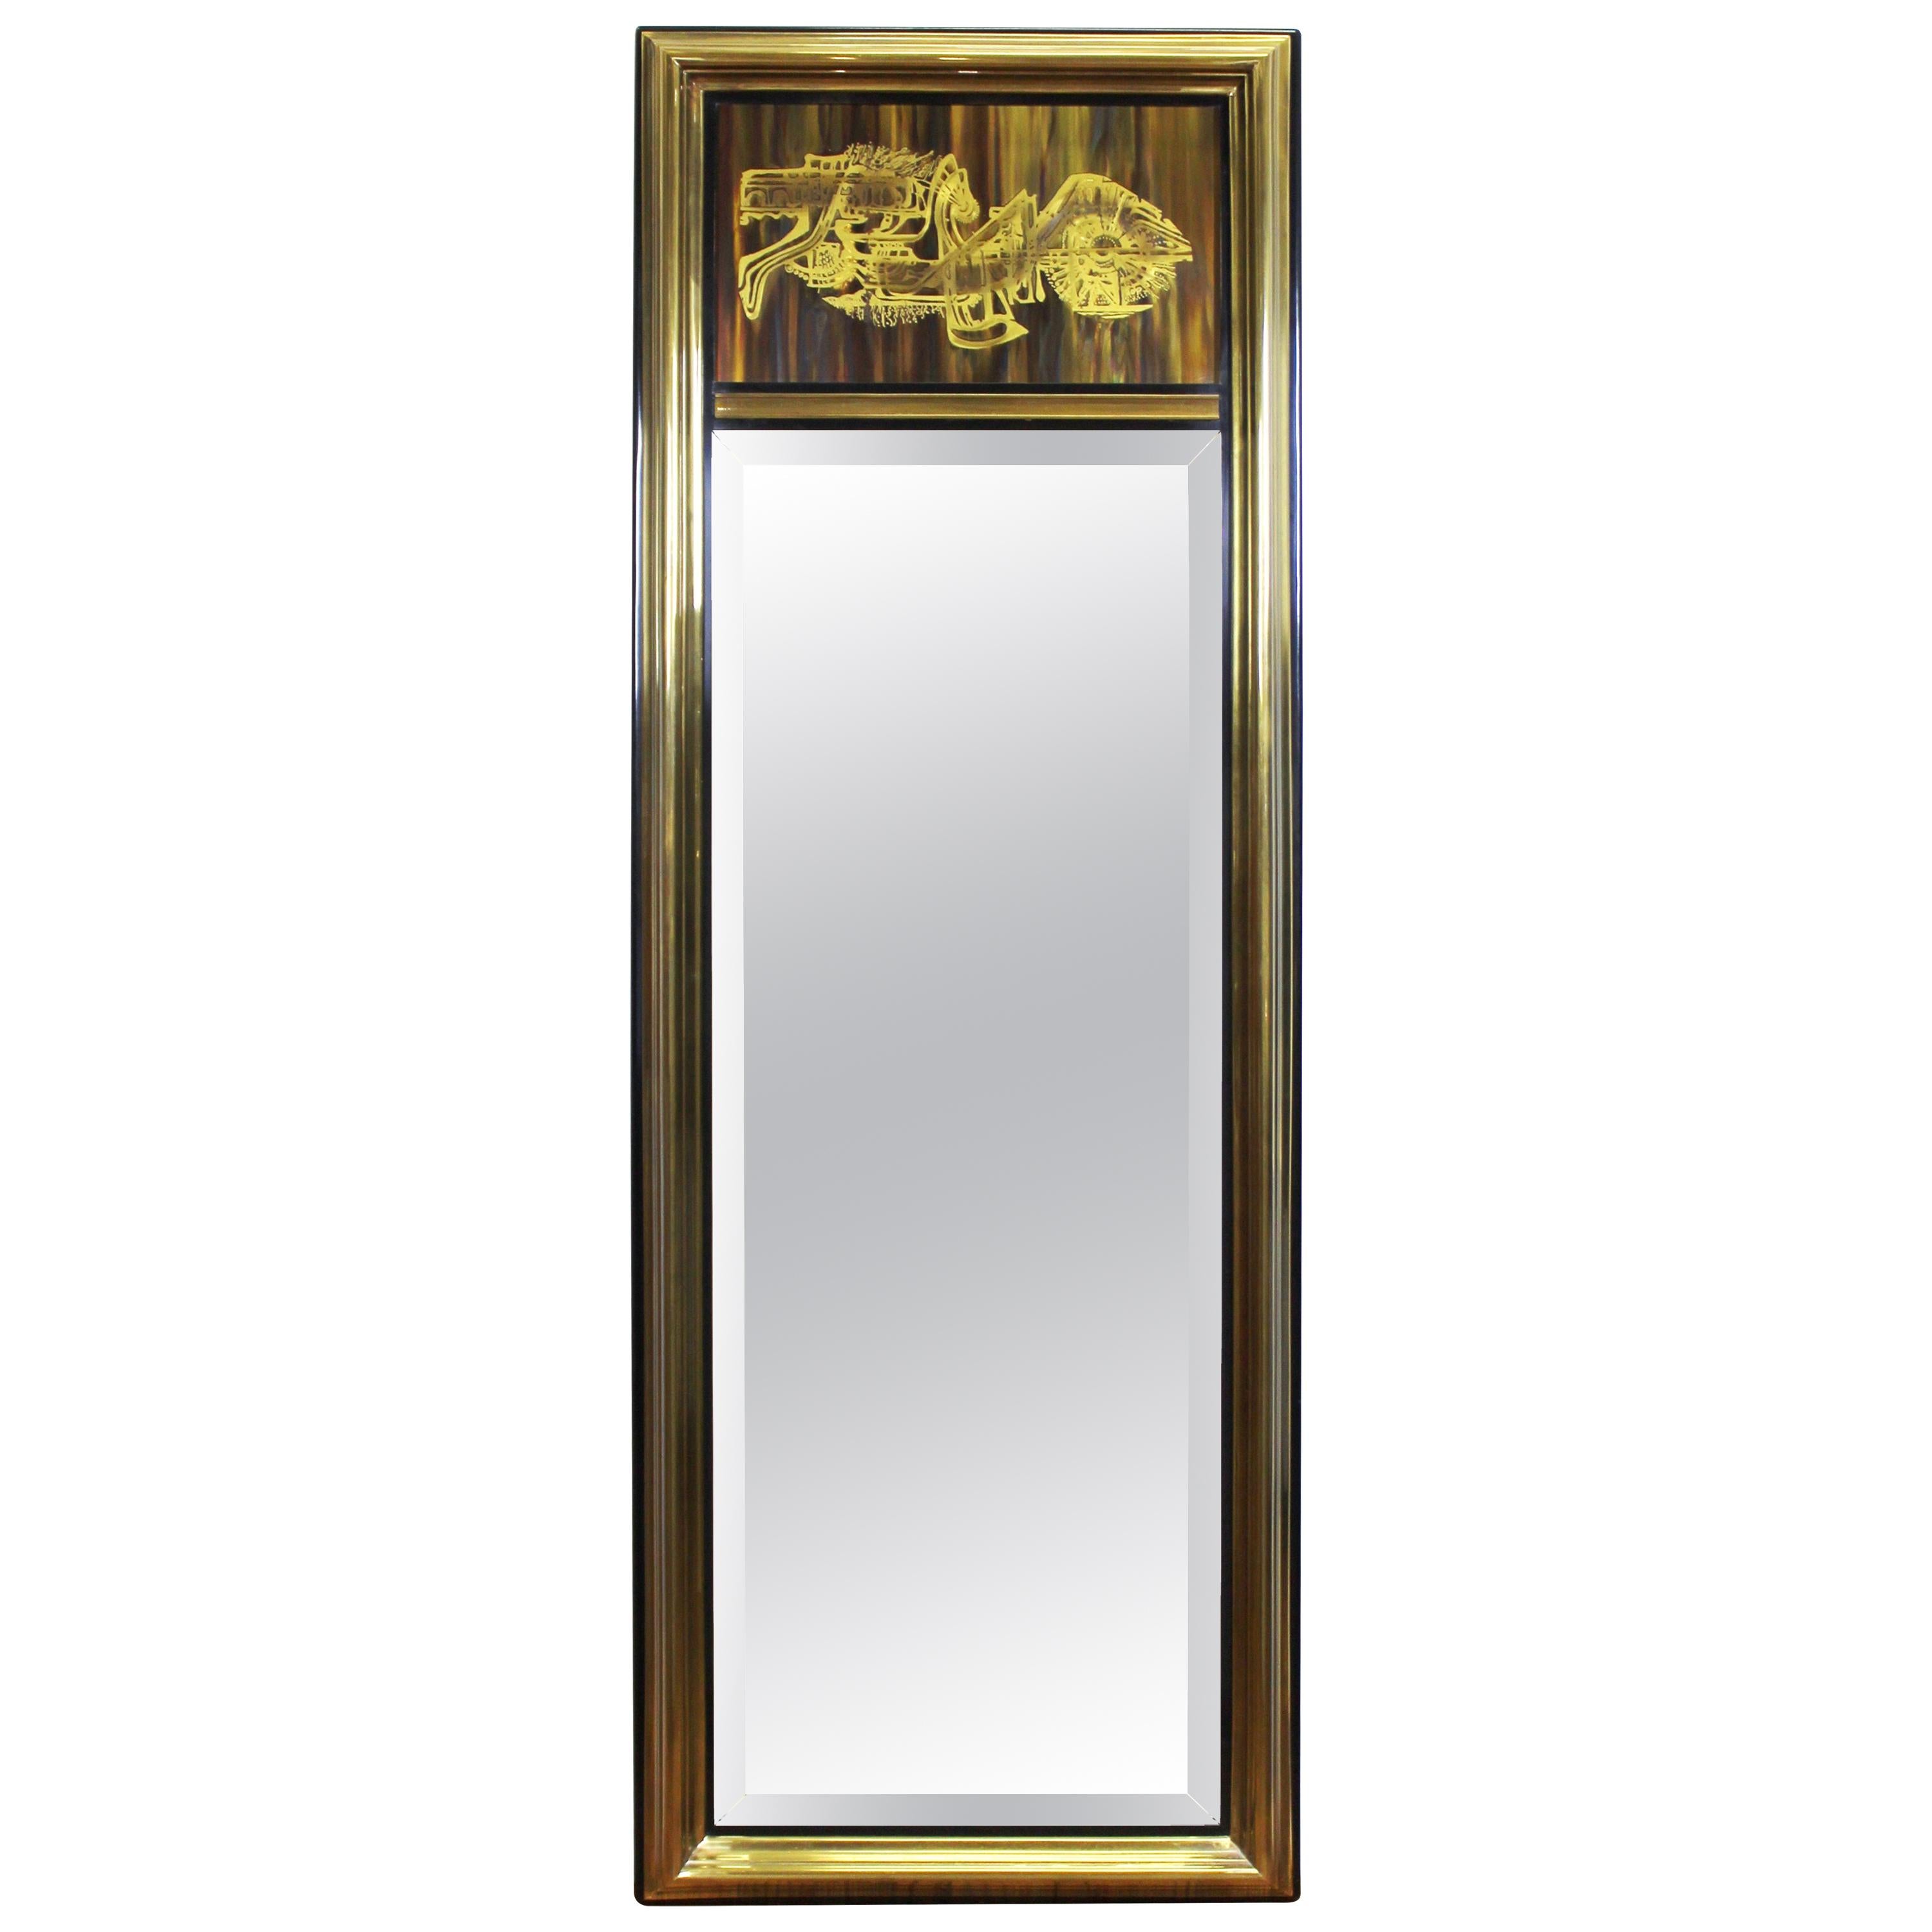 Mastercraft Mid-Century Modern Wall Mirror with Acid-Etched Metal Panel